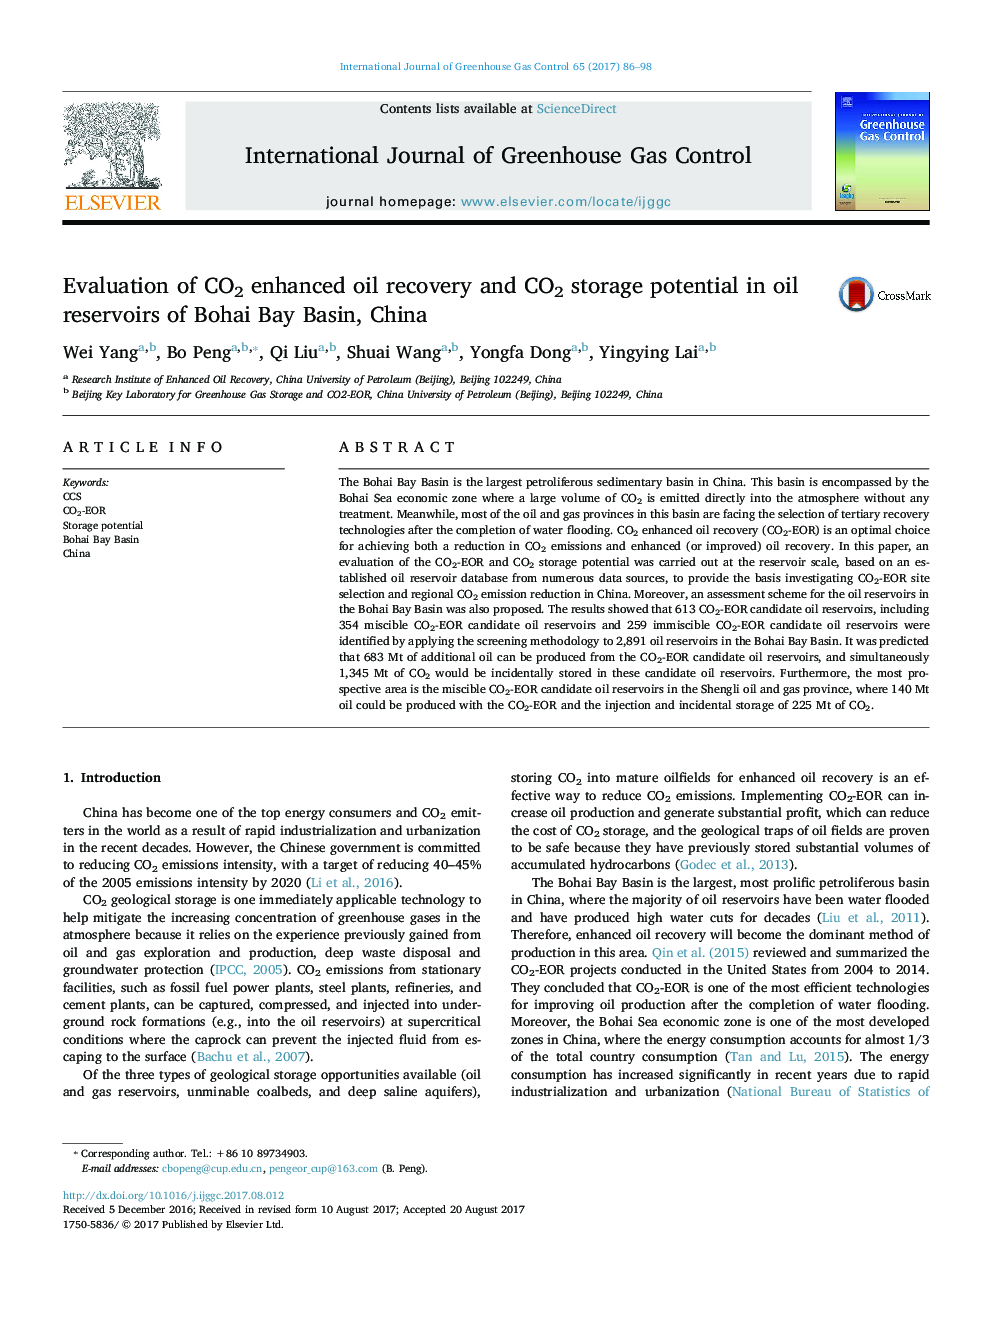 Evaluation of CO2 enhanced oil recovery and CO2 storage potential in oil reservoirs of Bohai Bay Basin, China